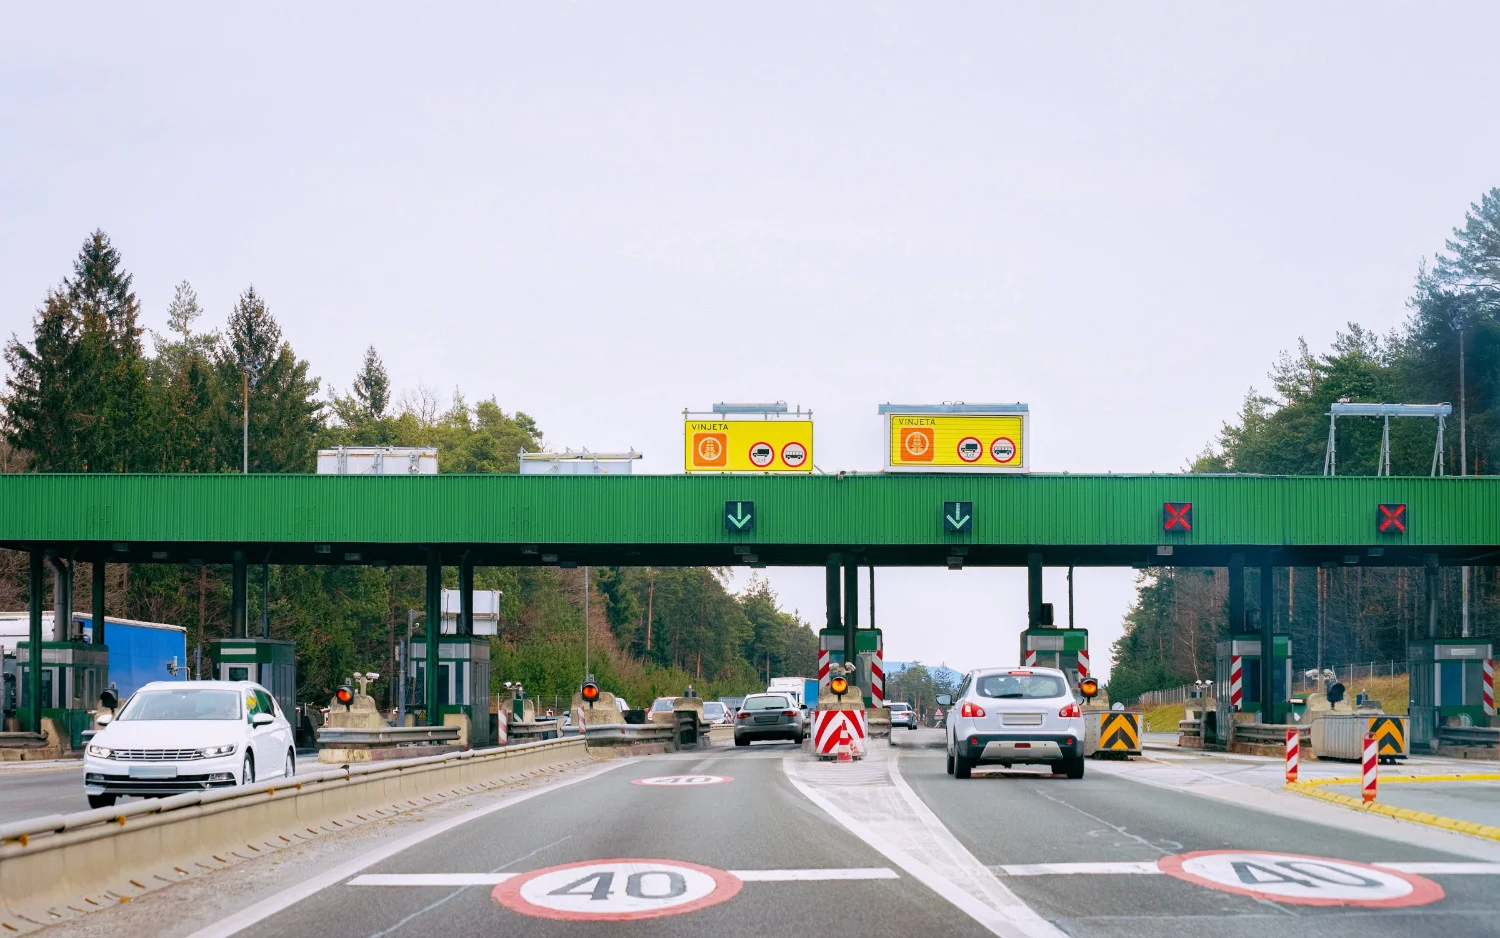 To use the motorways in Slovenia, tolls (where applicable) are payable using a mandatory electronic tag, known as an e-vignette.